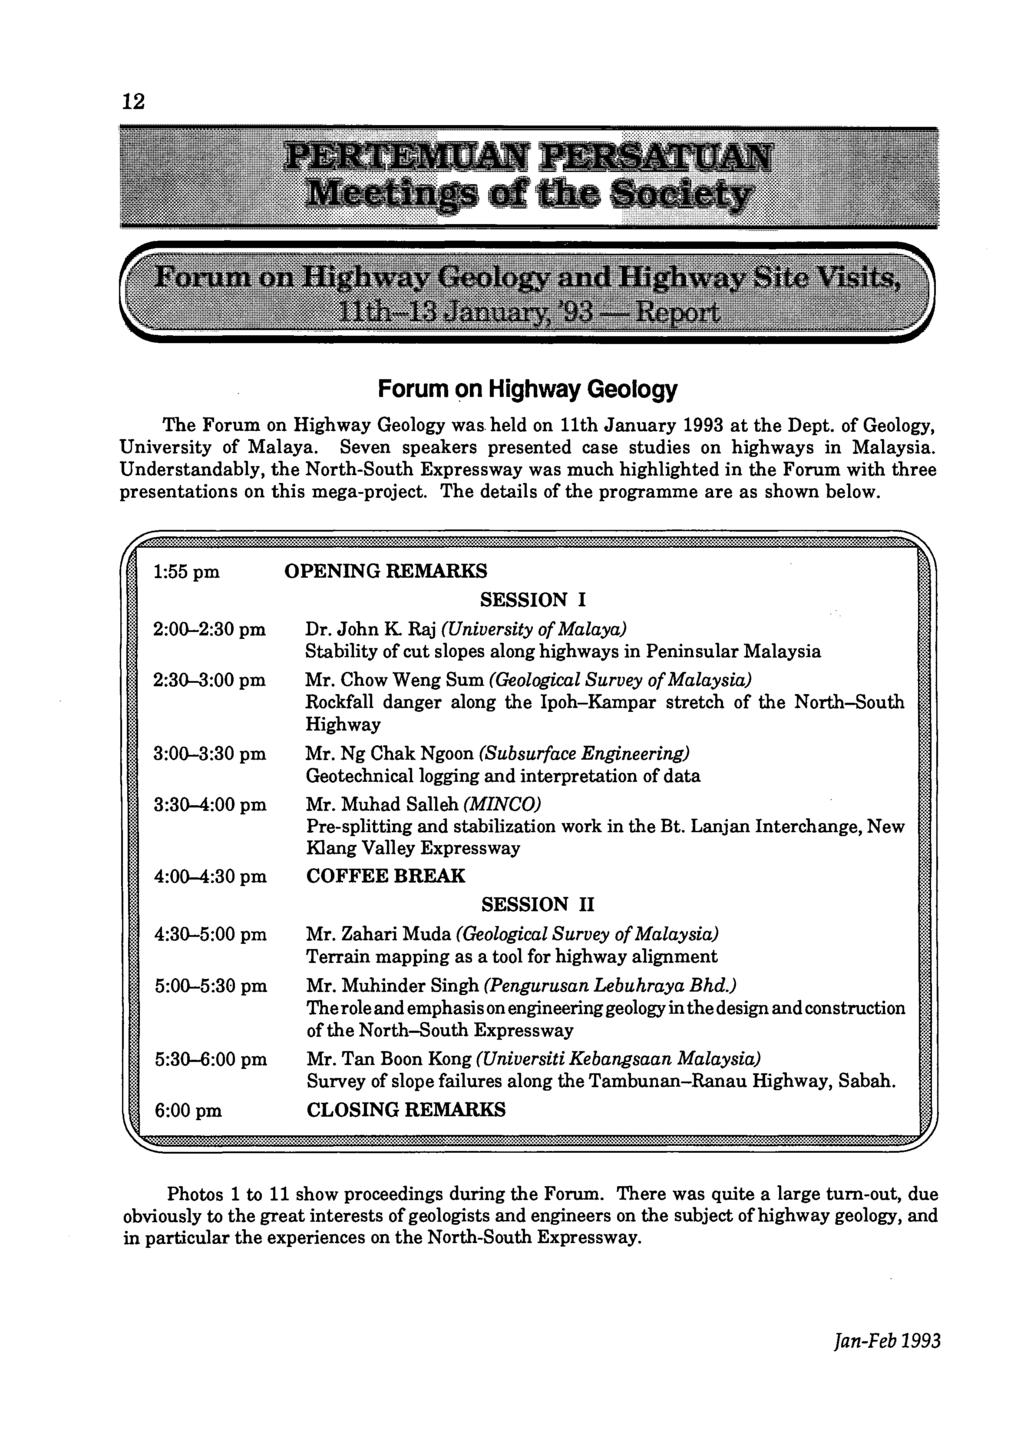 12 Forum on Highway Geology The Forum on Highway Geology was held on 11th January 1993 at the Dept. of Geology, University of Malaya. Seven speakers presented case studies on highways in Malaysia.